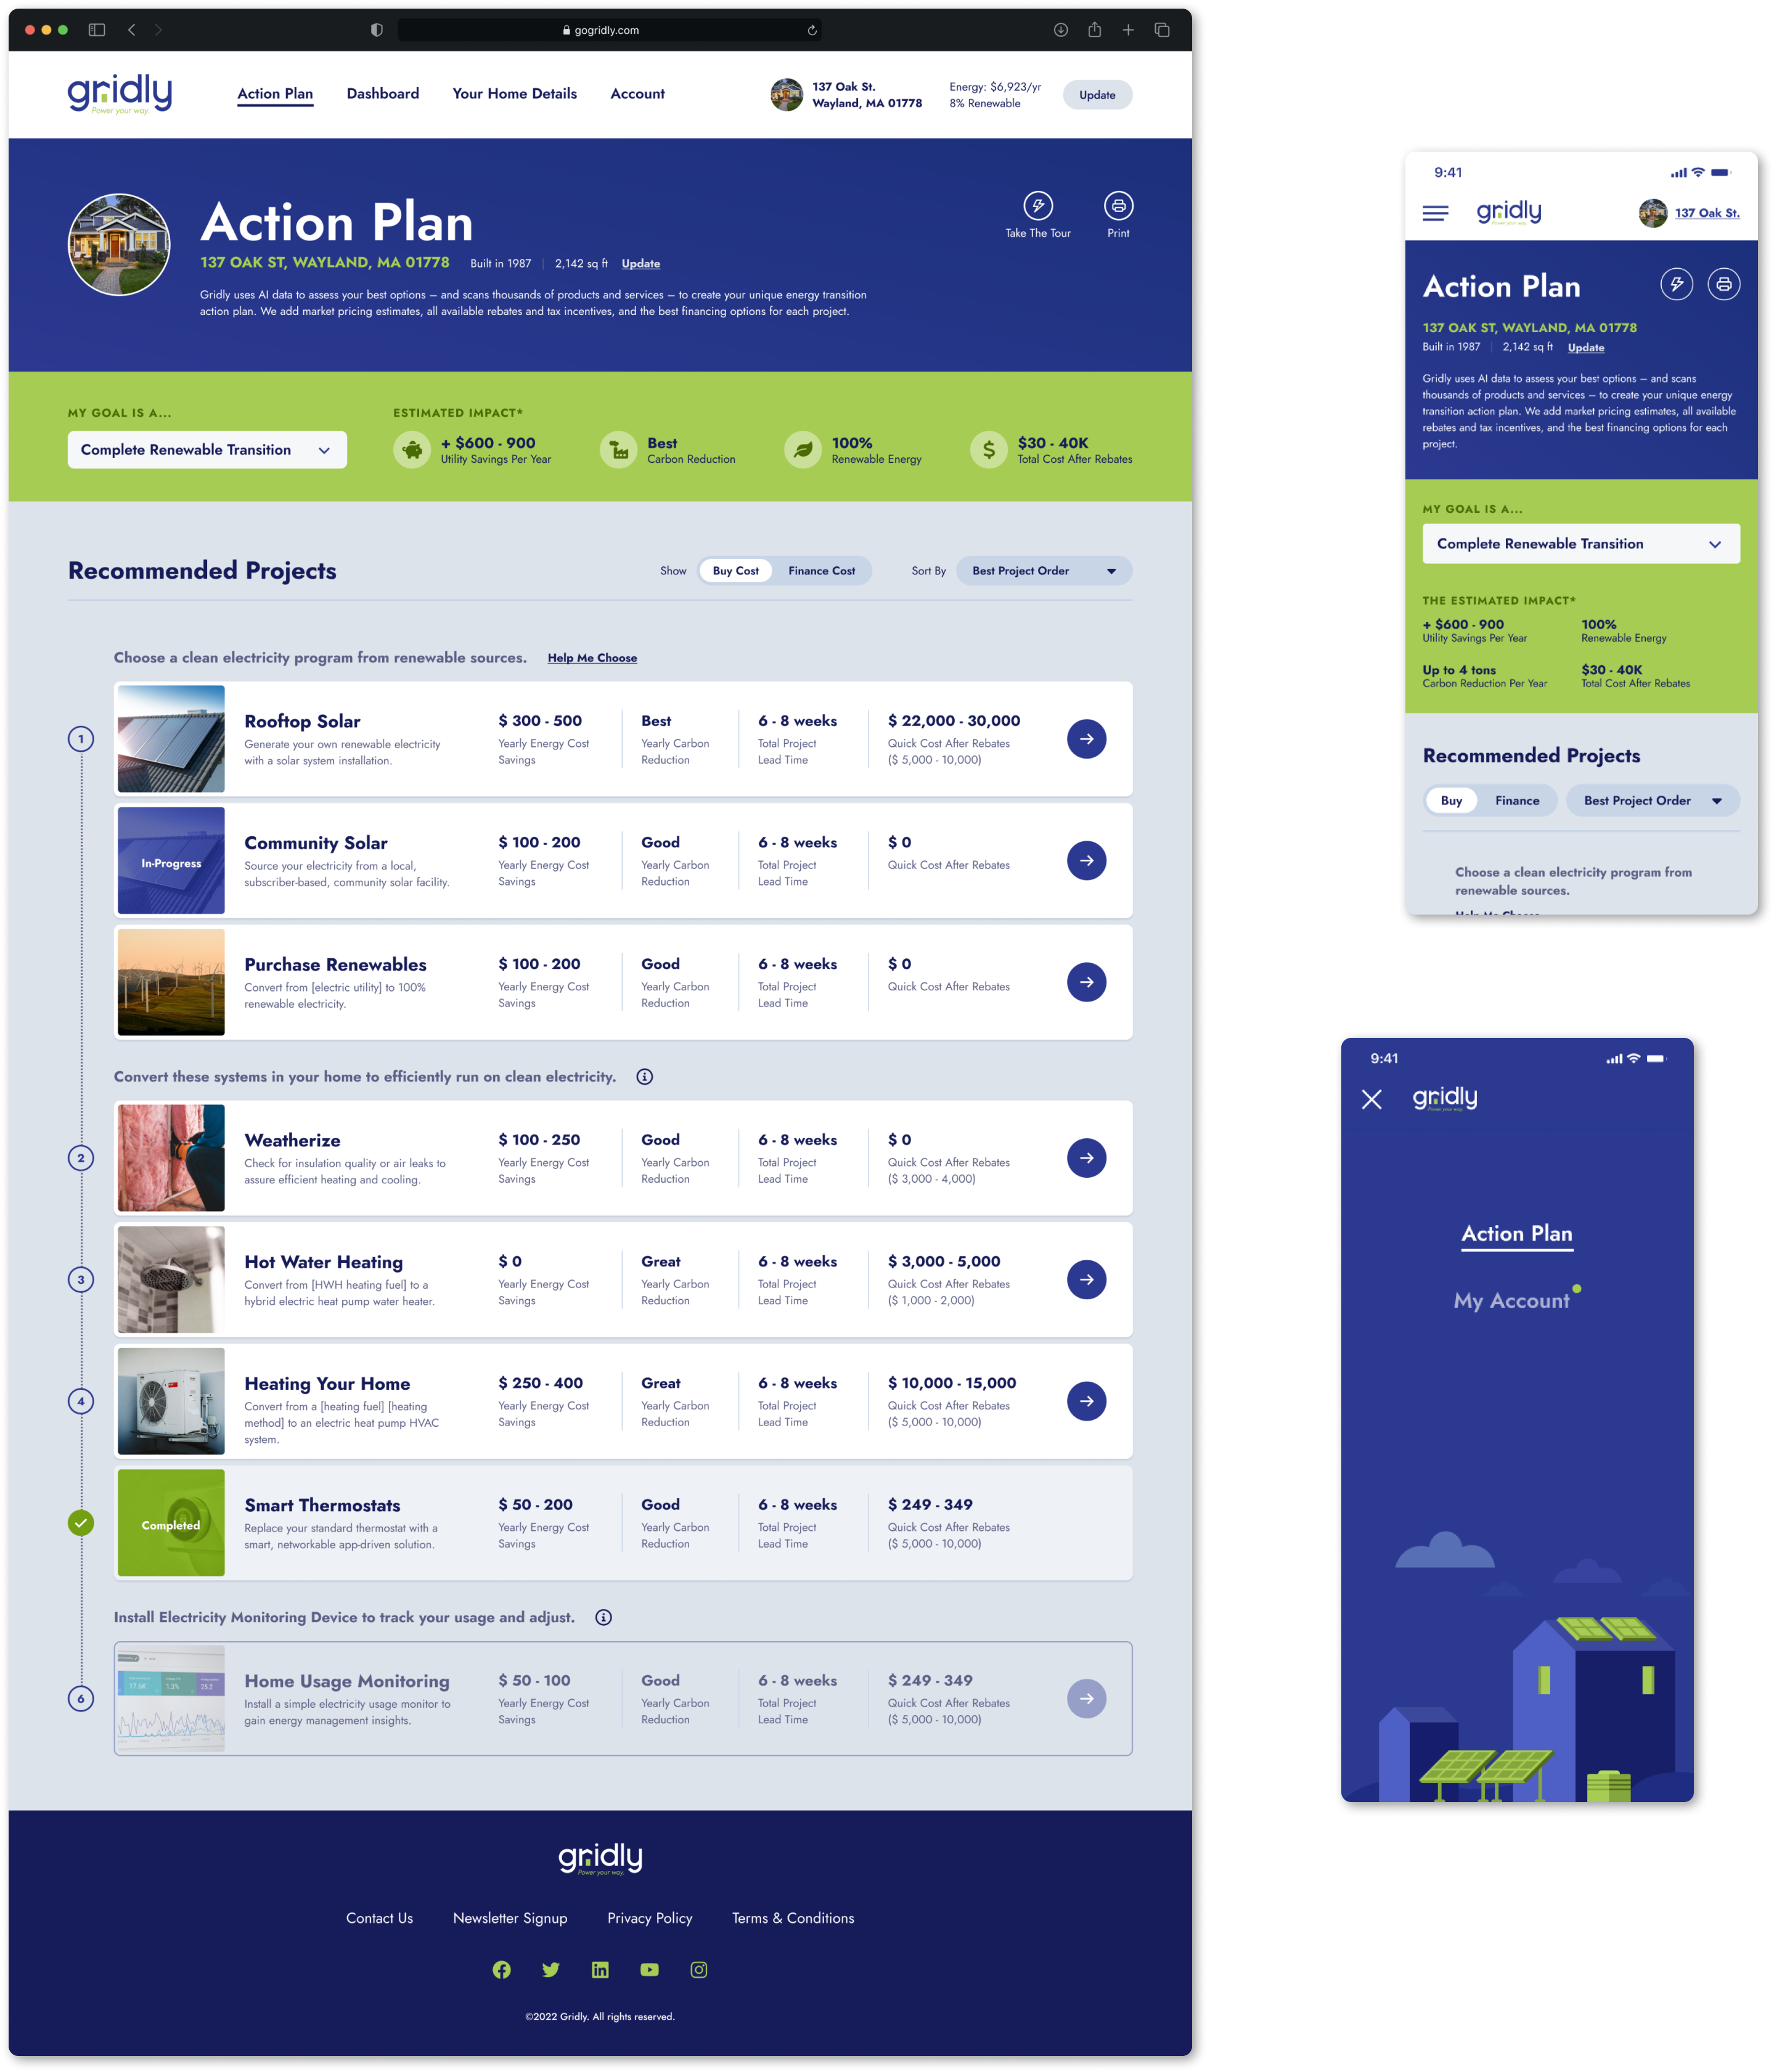 Desktop and mobile screens of the Gridly Action Plan page.